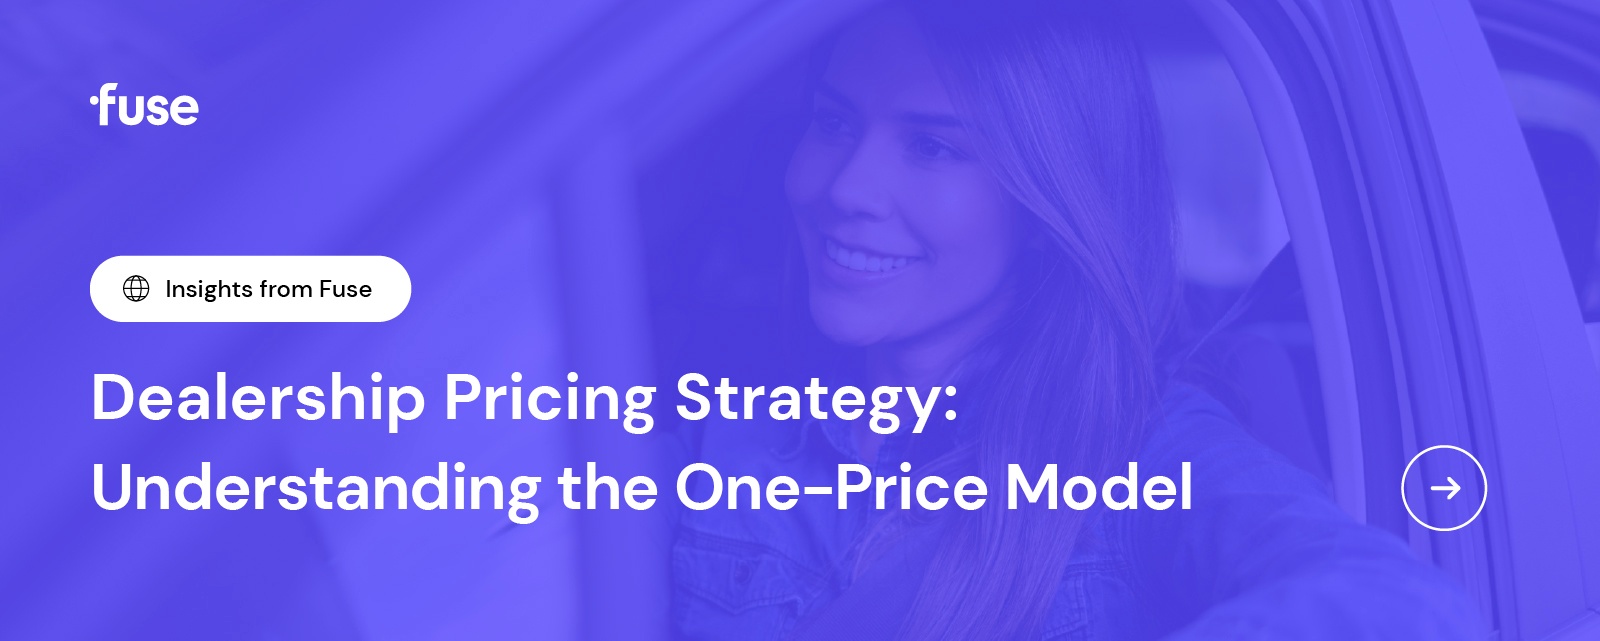 Insights: Dealership Pricing Strategy: Understanding the One-Price Model